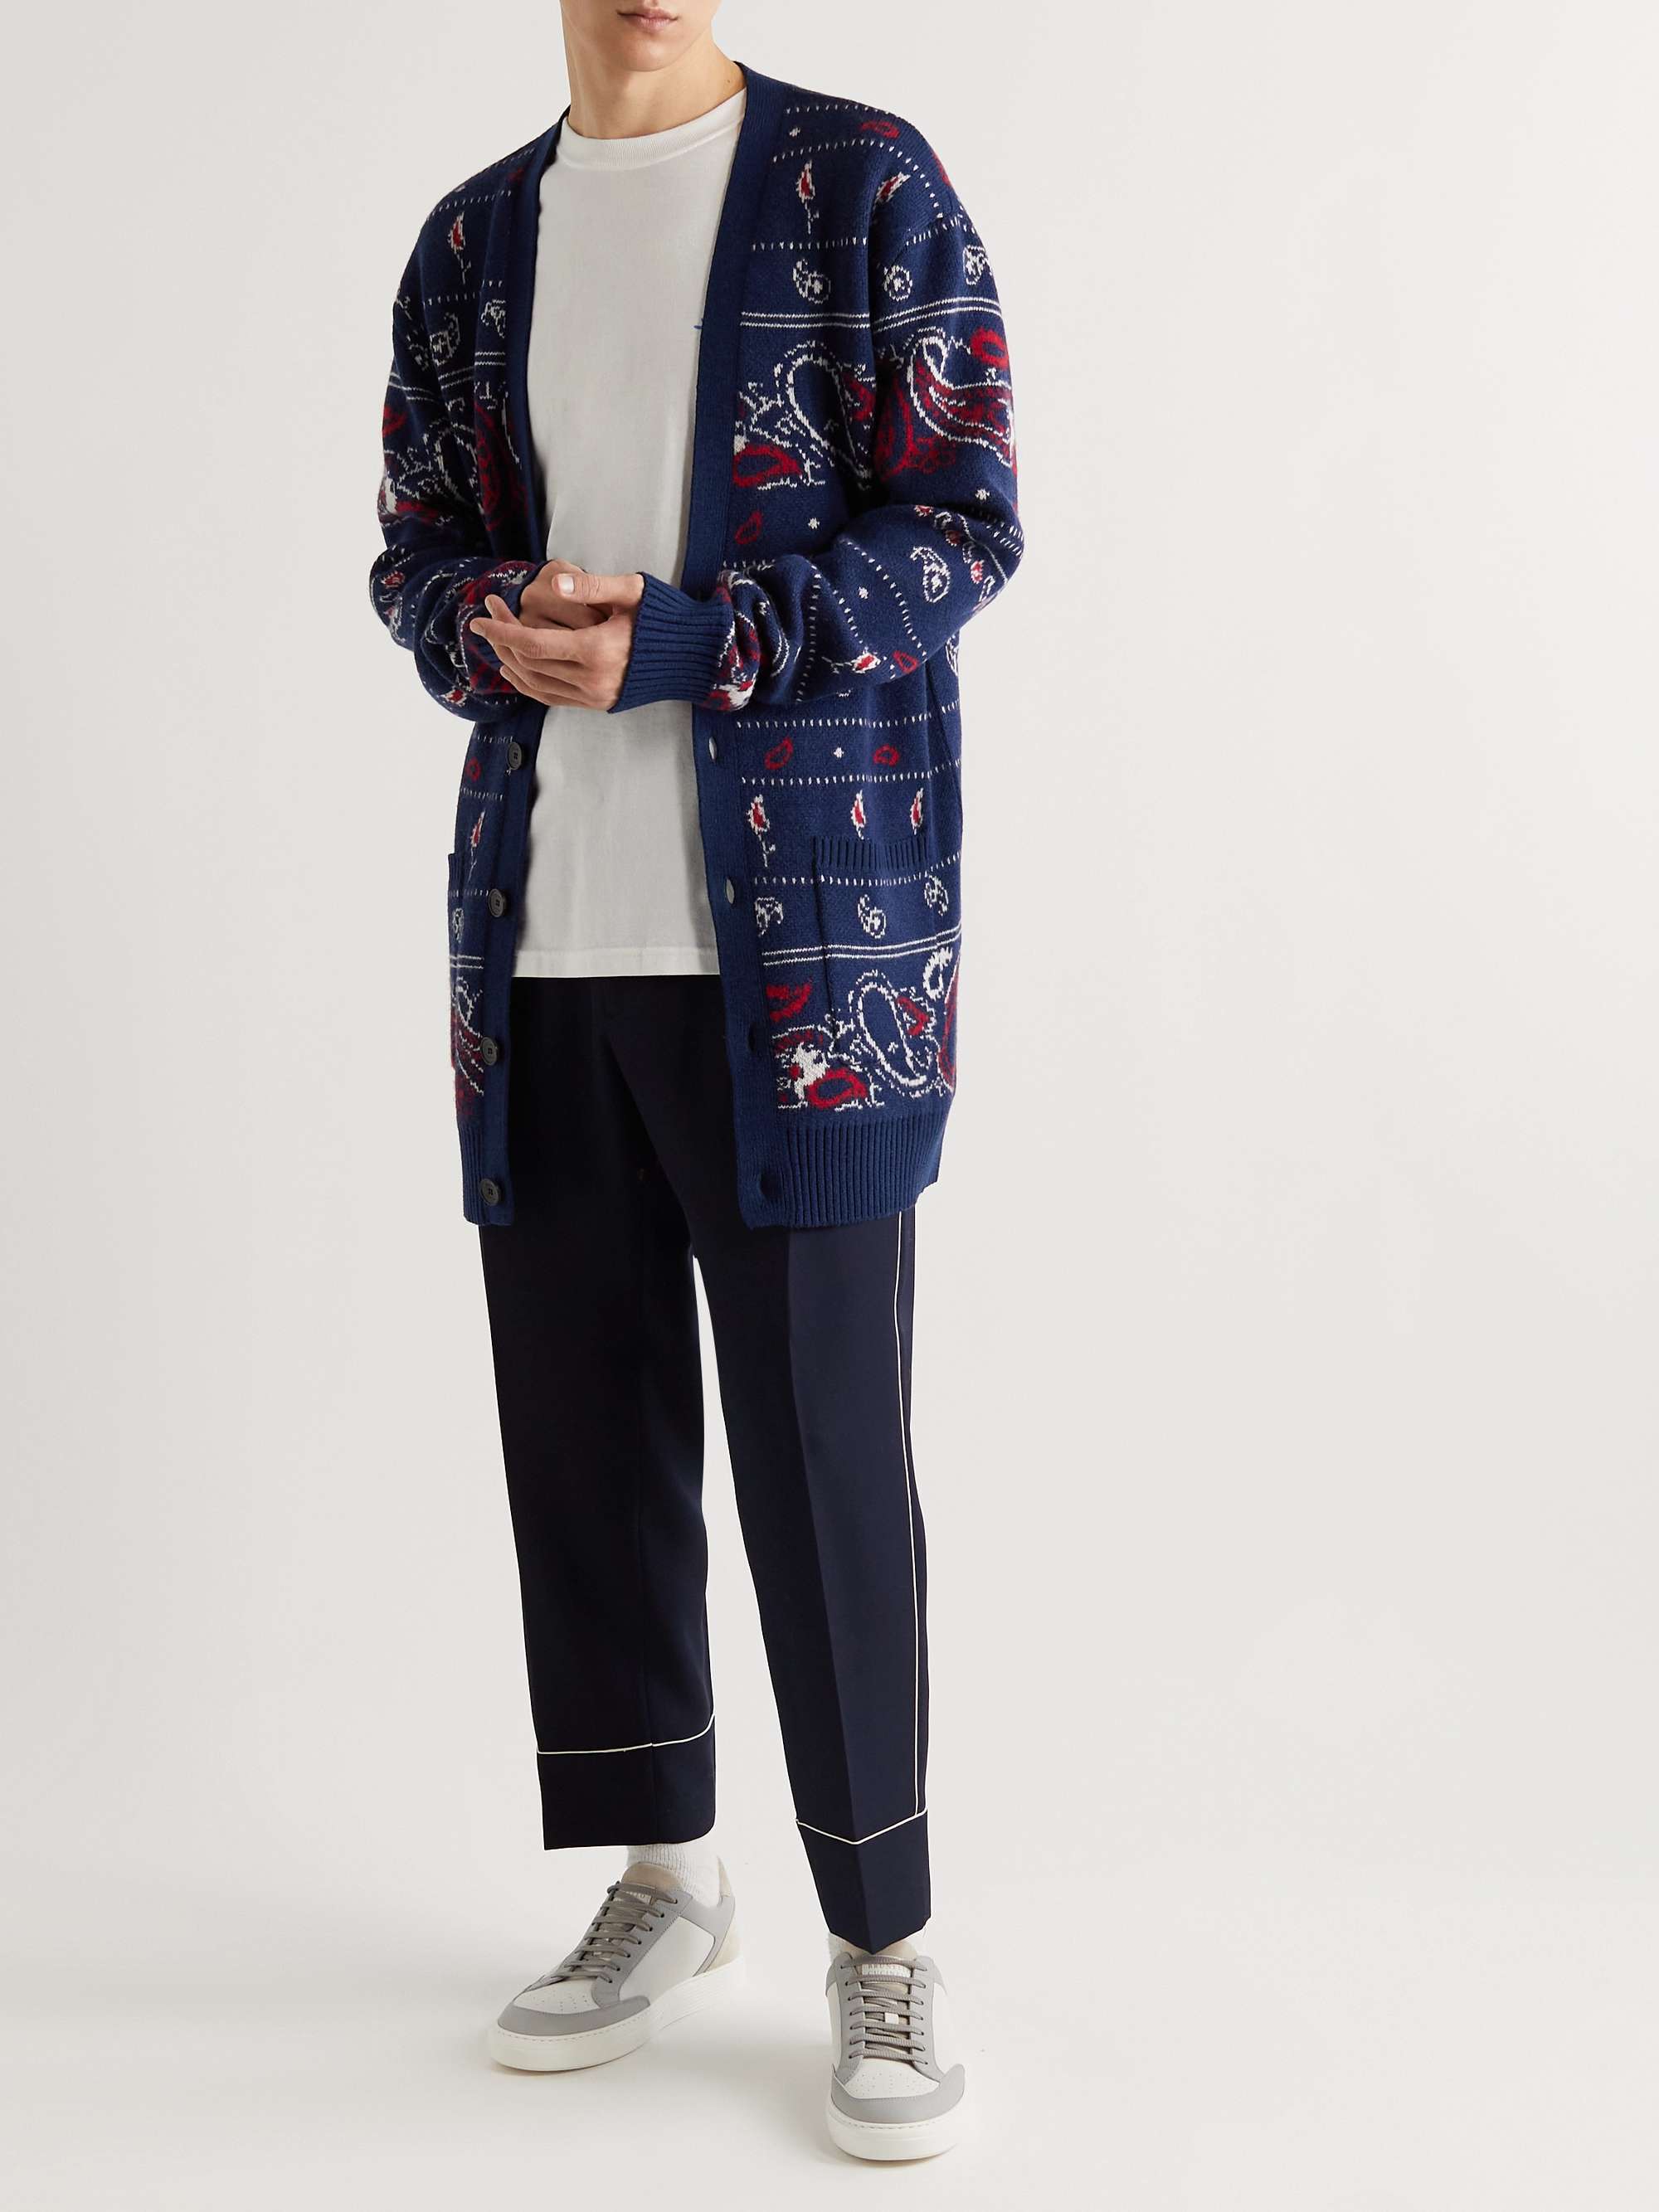 ETRO Wool, Cotton and Cashmere-Blend Jacquard Cardigan